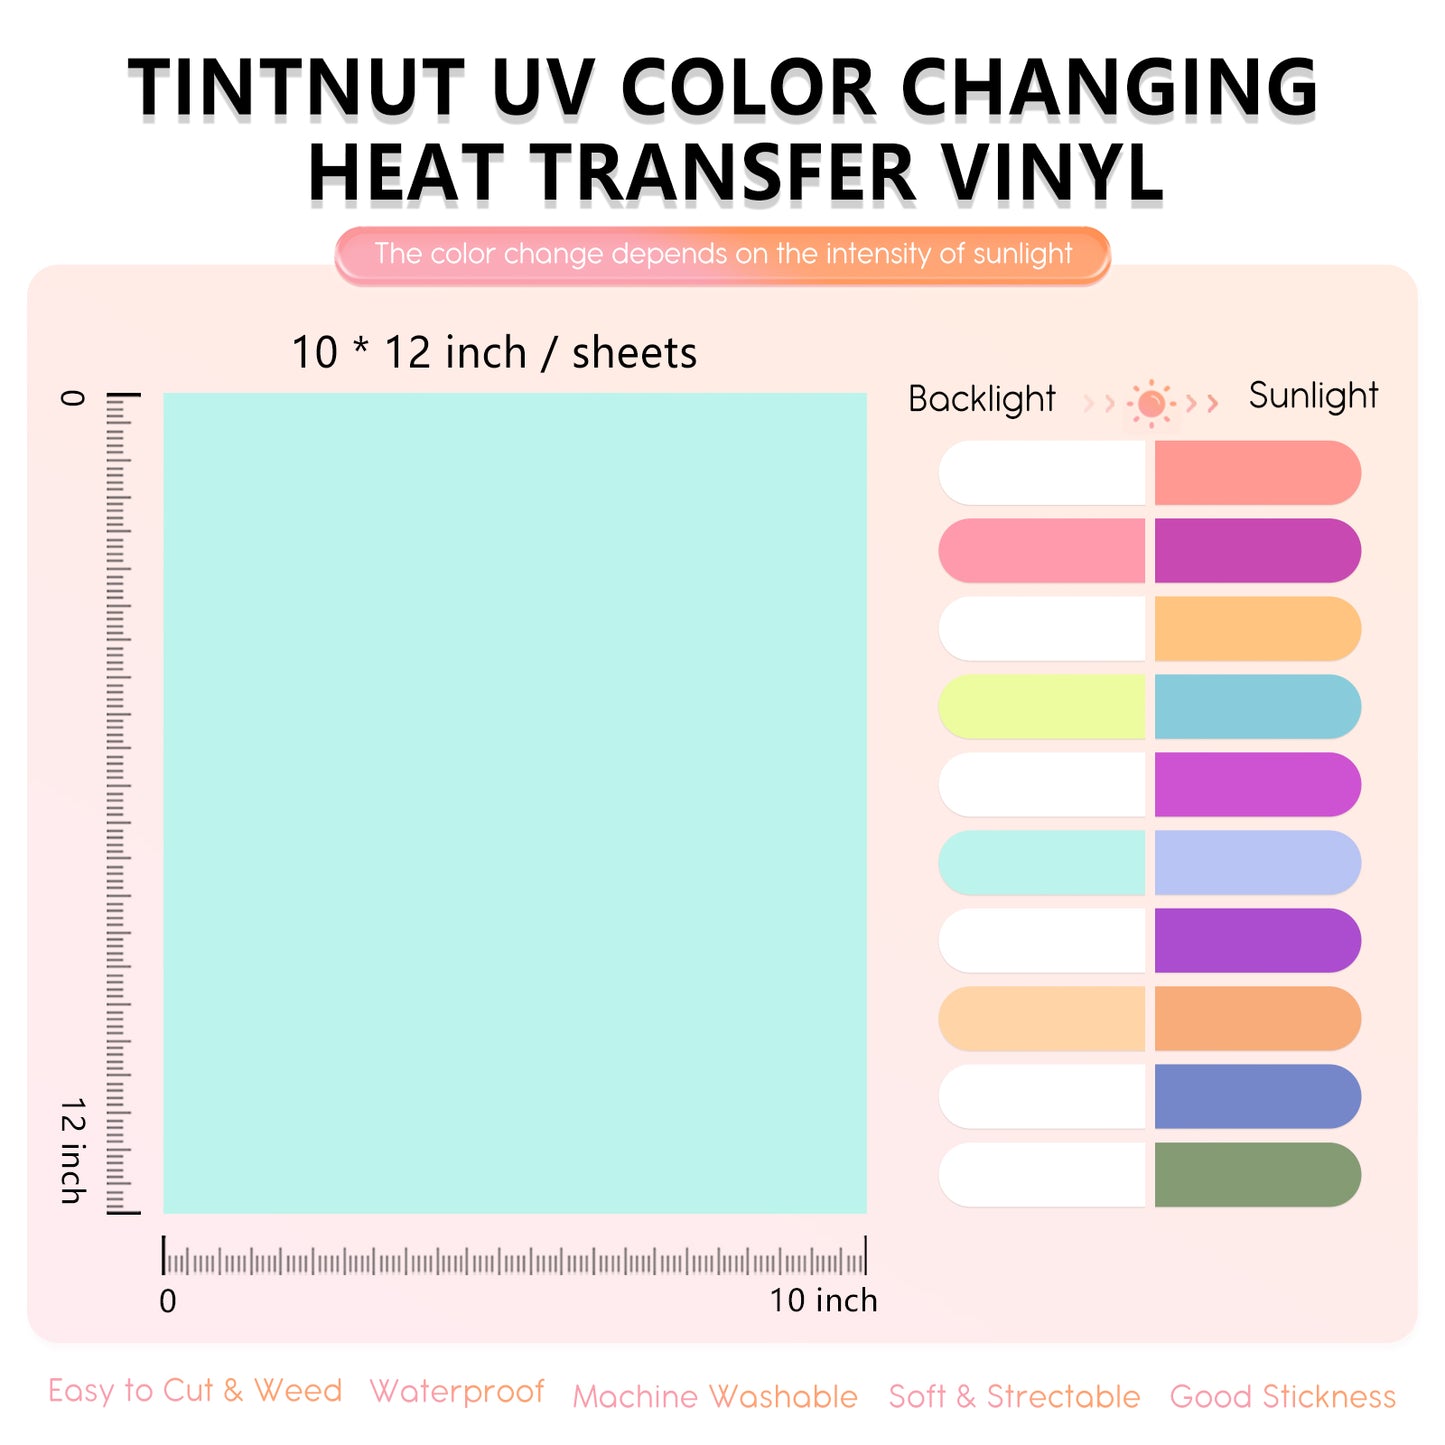 Tintnut Iron on Vinyl - 12 Sheets 12x10inch UV Color Changing Heat Transfer Vinyl Solid Sun Sunlight Sensitive HTV For T-Shirts Compatible with Cricut or Silhoutte Cameo